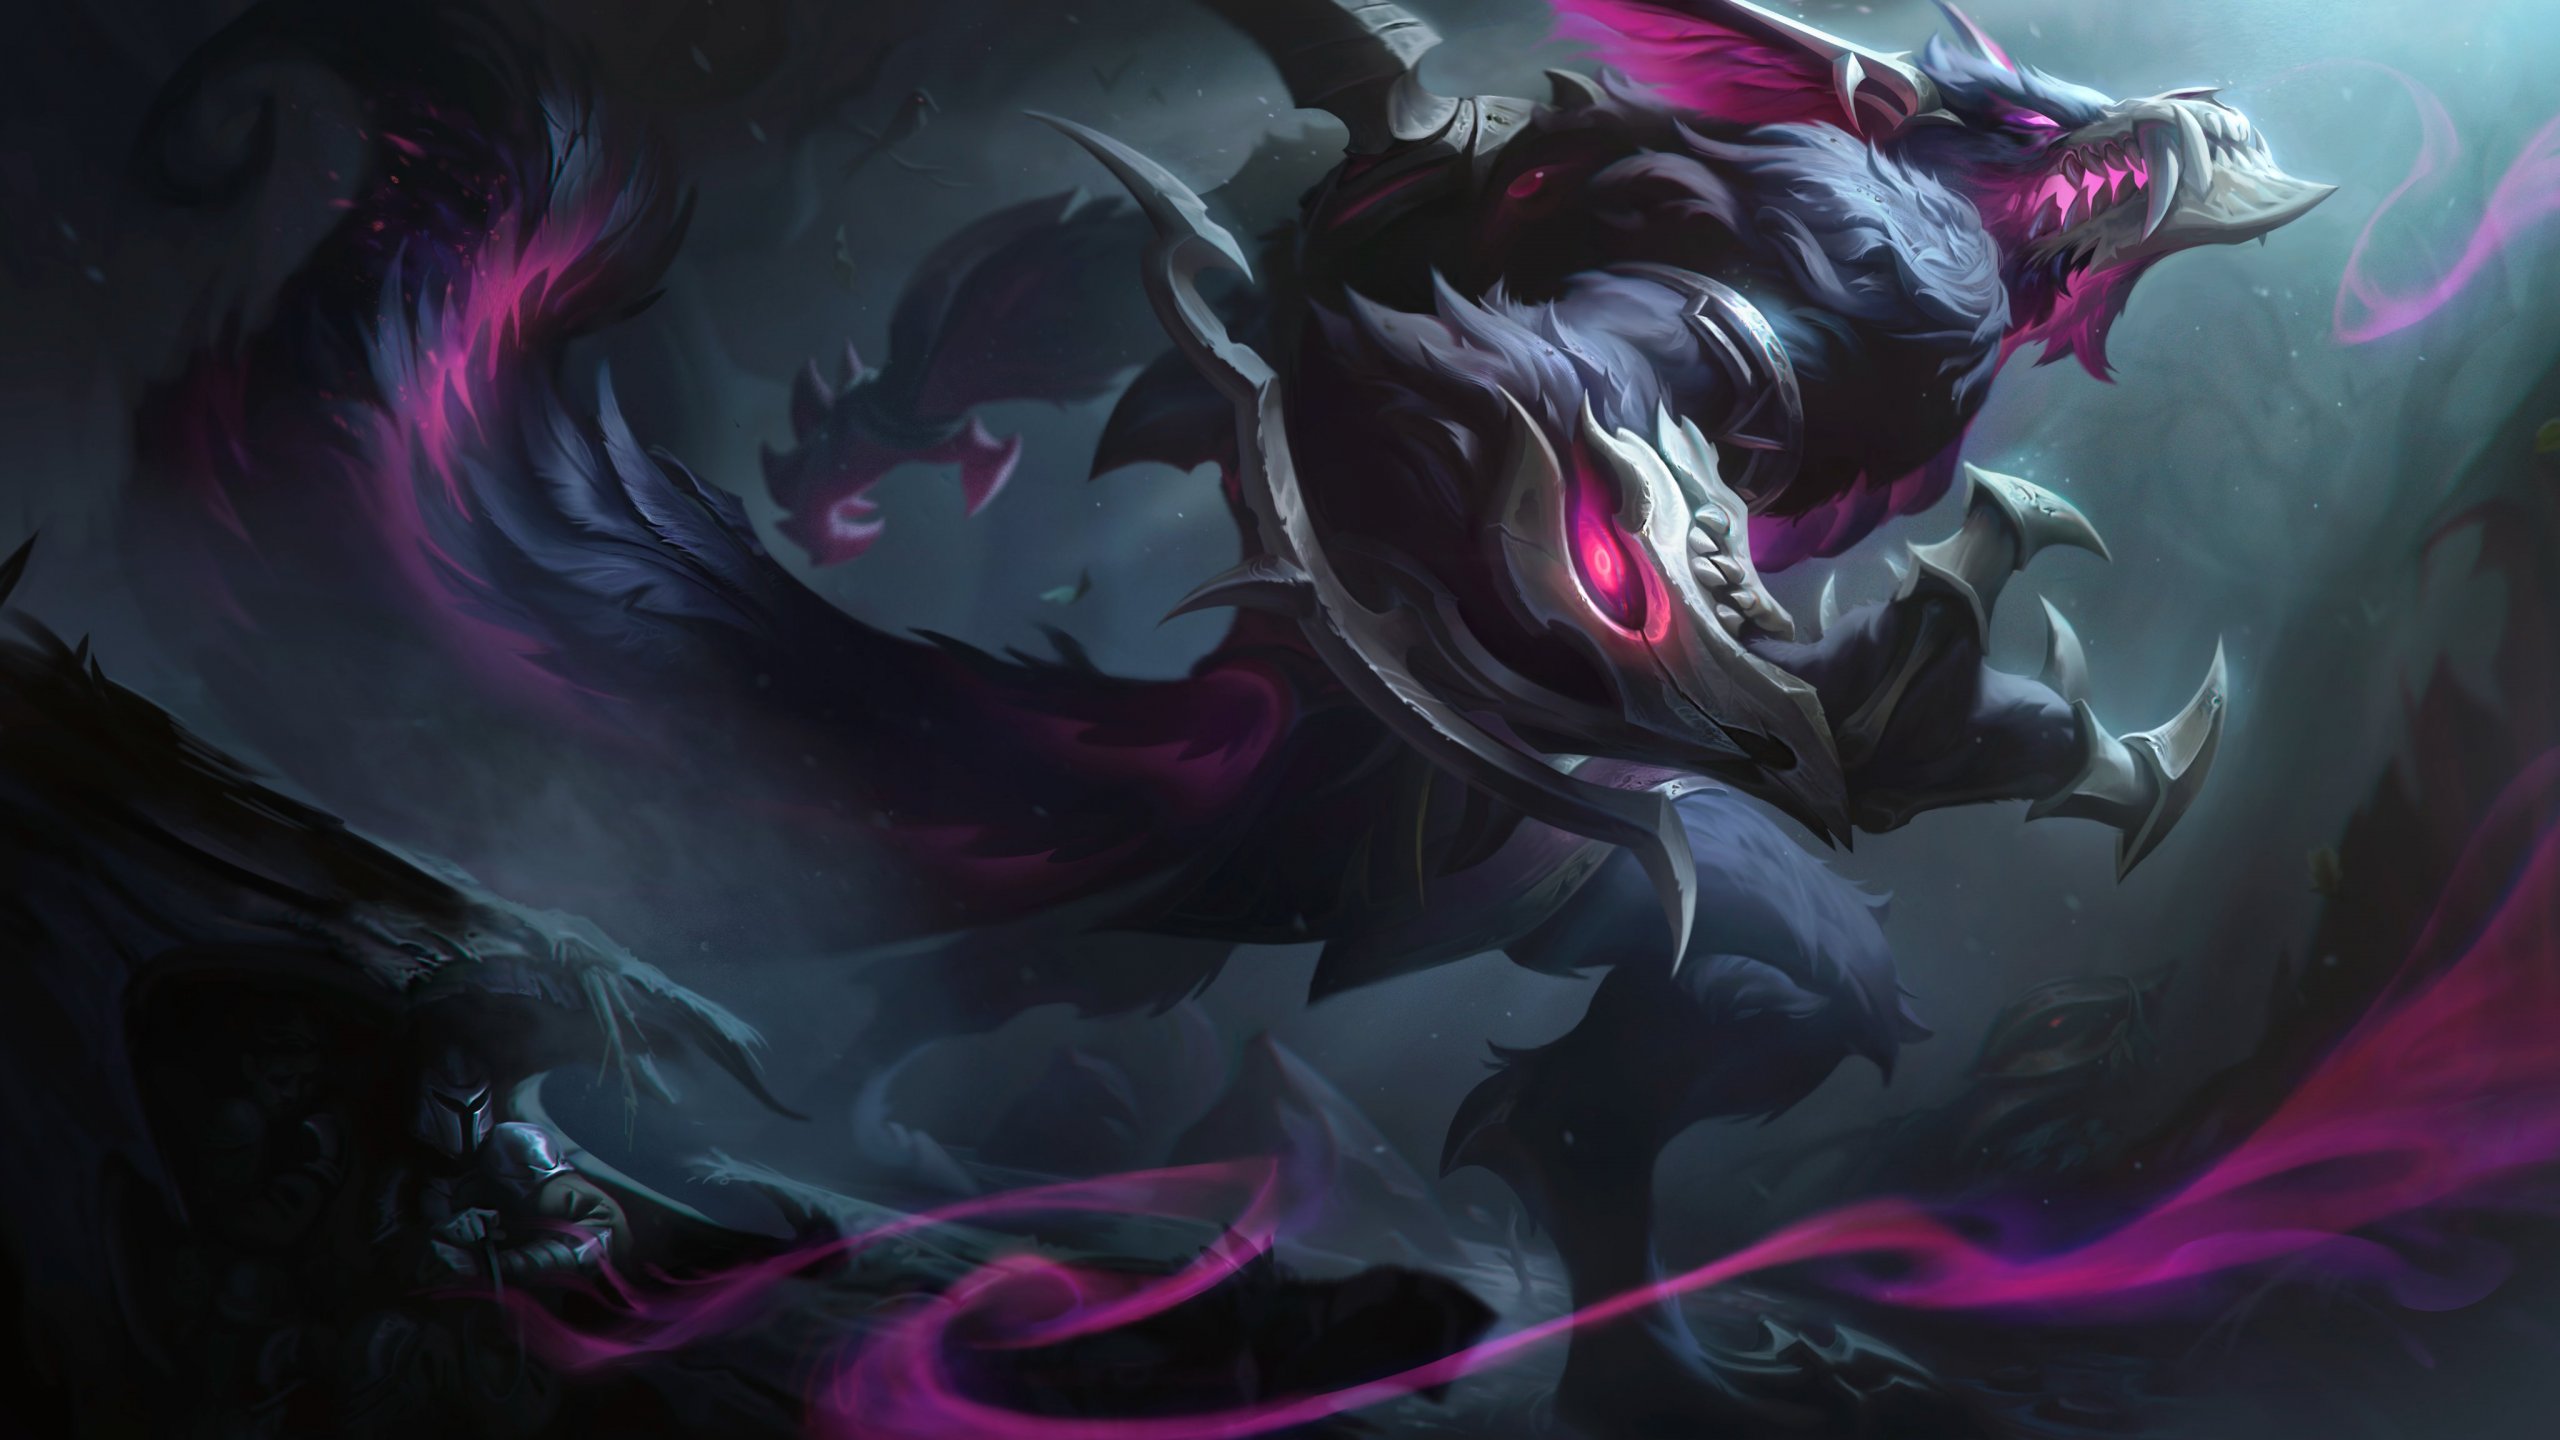 New League of Legends Coven skins include six new champions of Legends